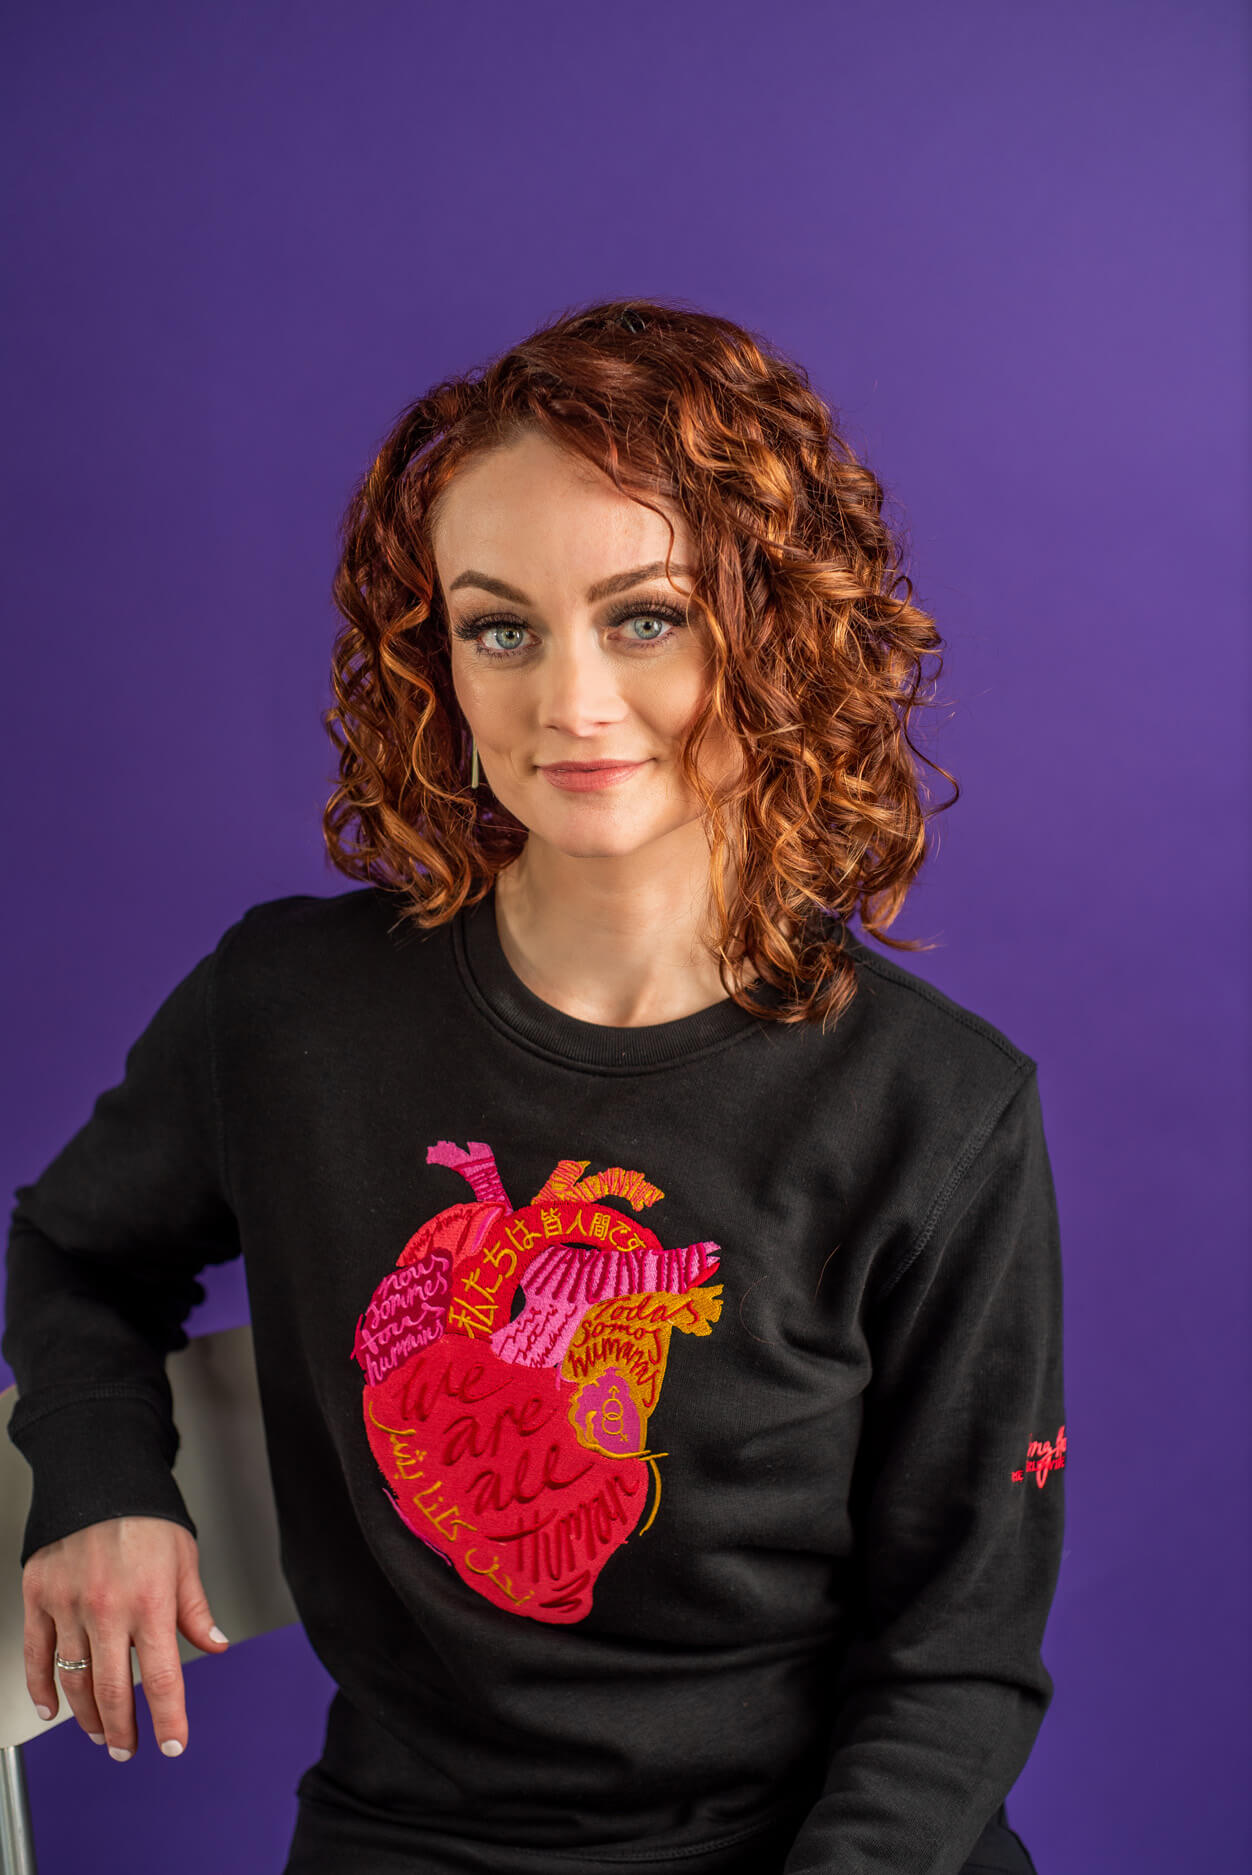 Kristin Flanary wearing a black sweater with an anatomical heart.